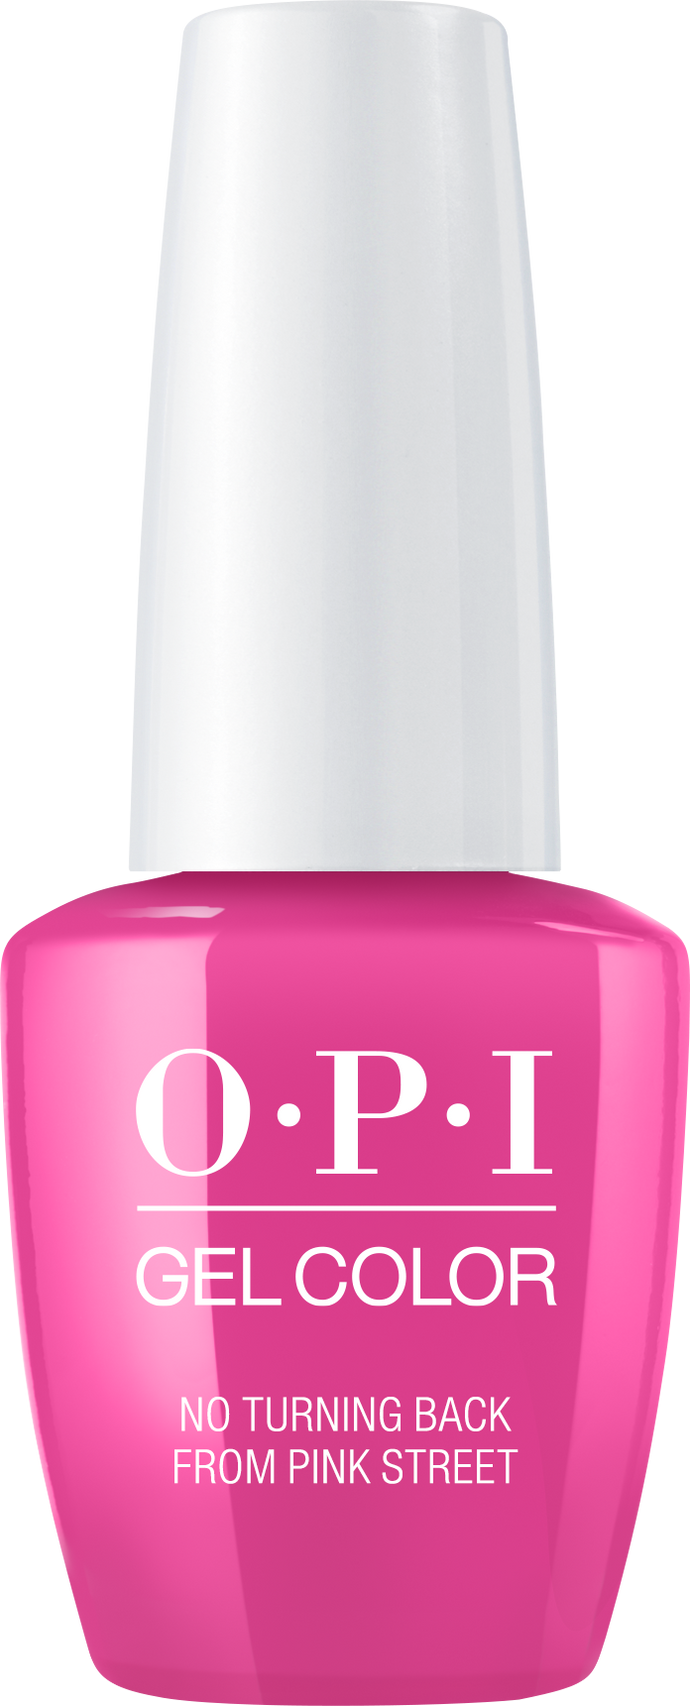 OPI OPI GelColor - No Turning Back From Pink Street 0.5 oz - #GCL19 - Sleek Nail